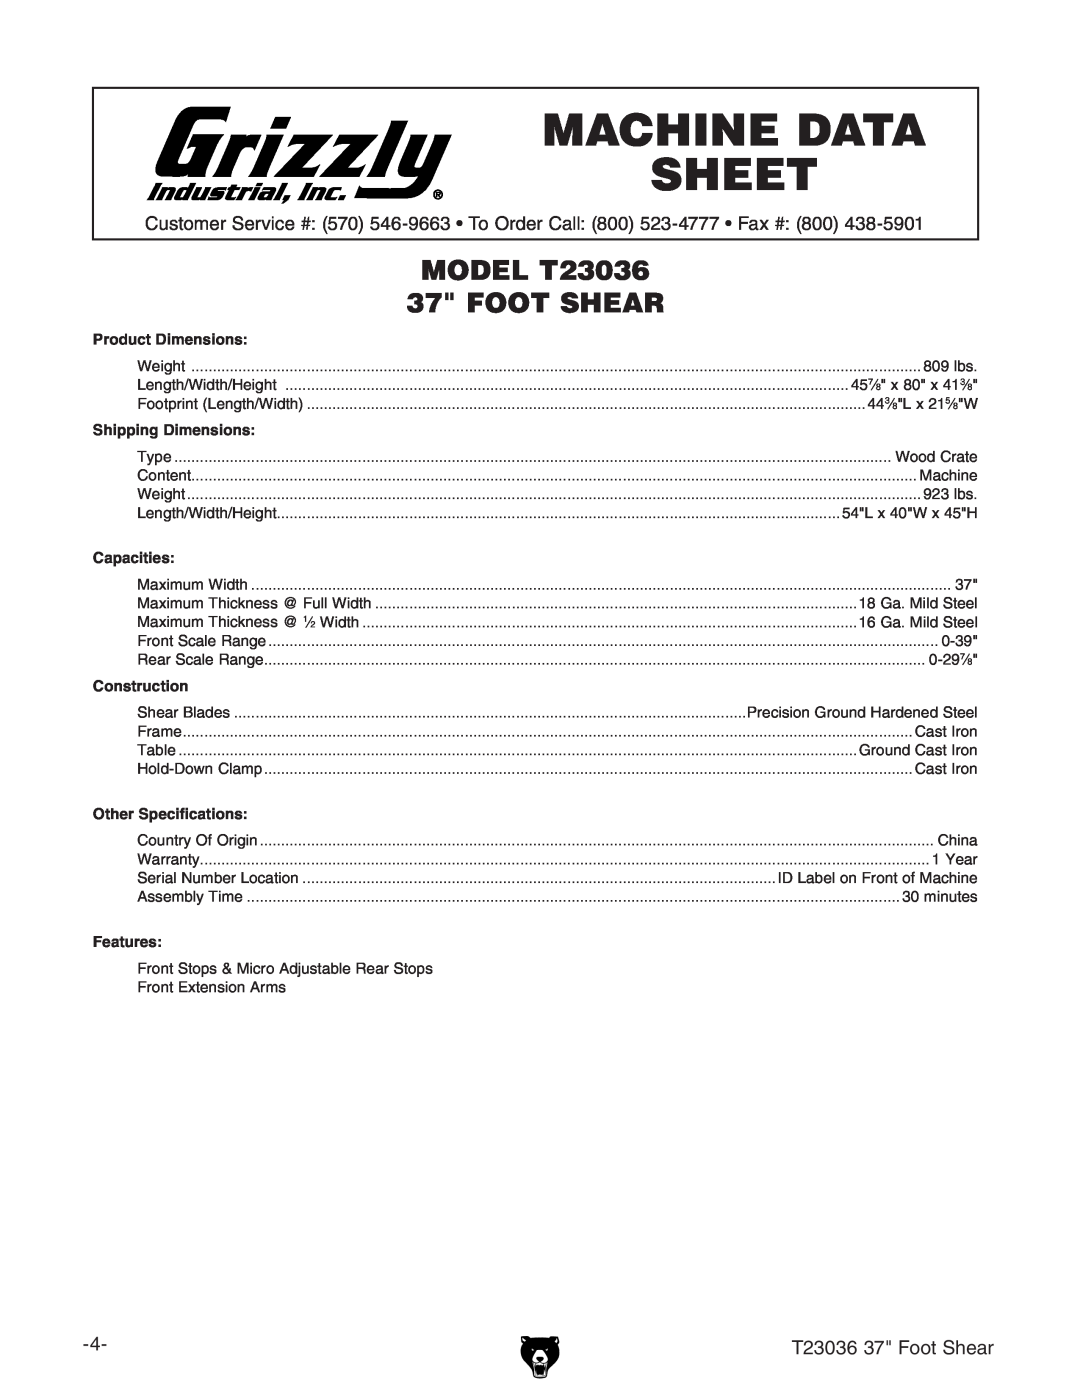 Grizzly Machine Data Sheet, MODEL T23036 37 FOOT SHEAR, Product Dimensions, Shipping Dimensions, Capacities, Features 